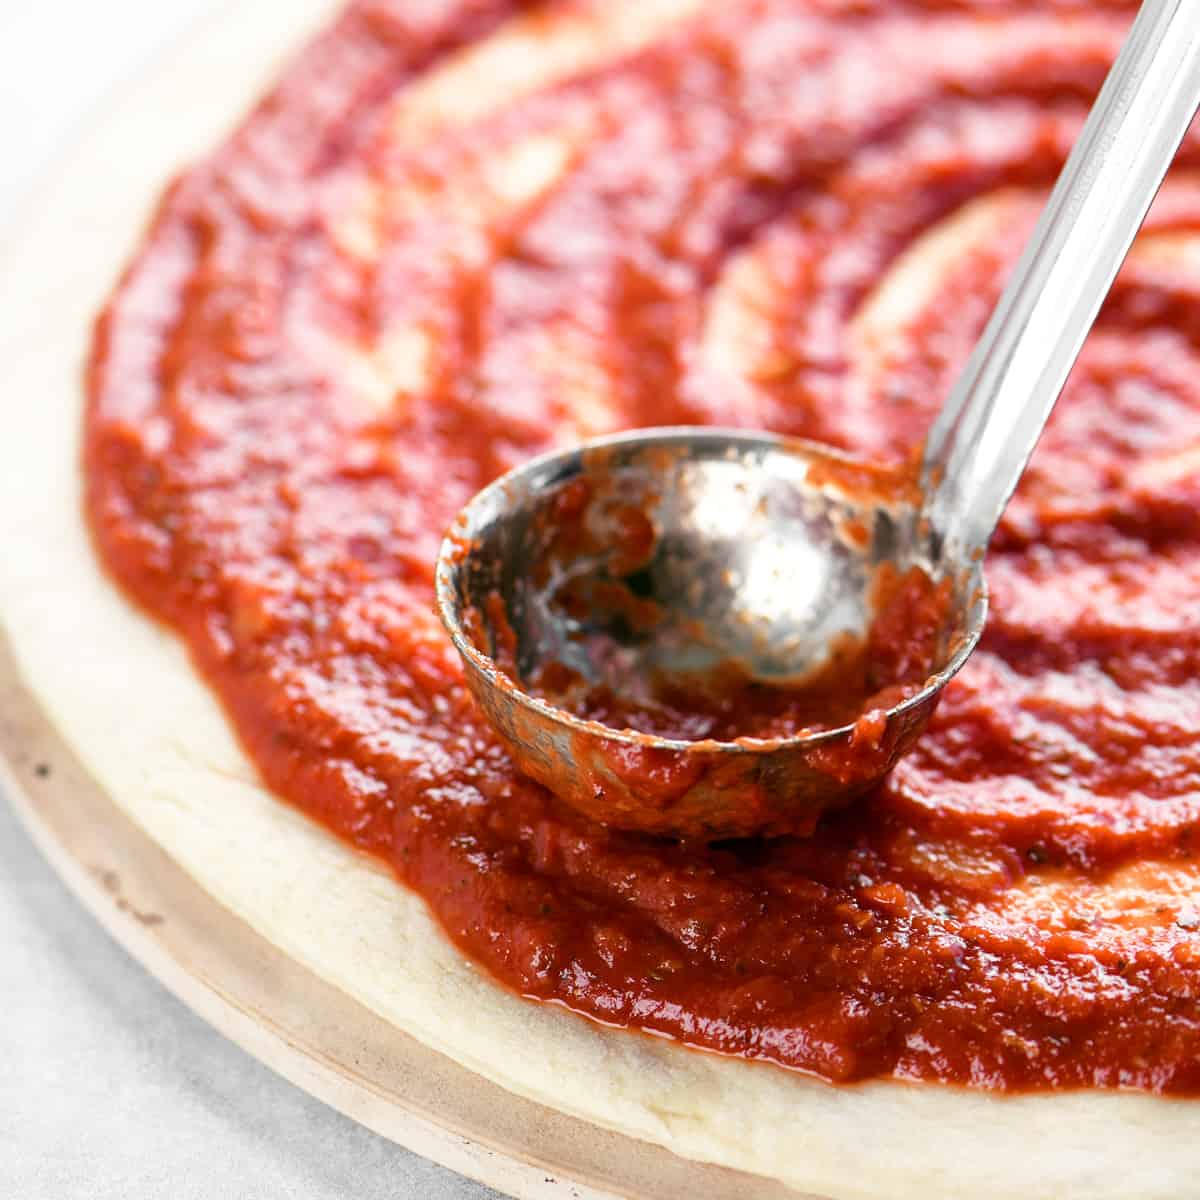 A ladle resting on pizza dough with sauce on top.